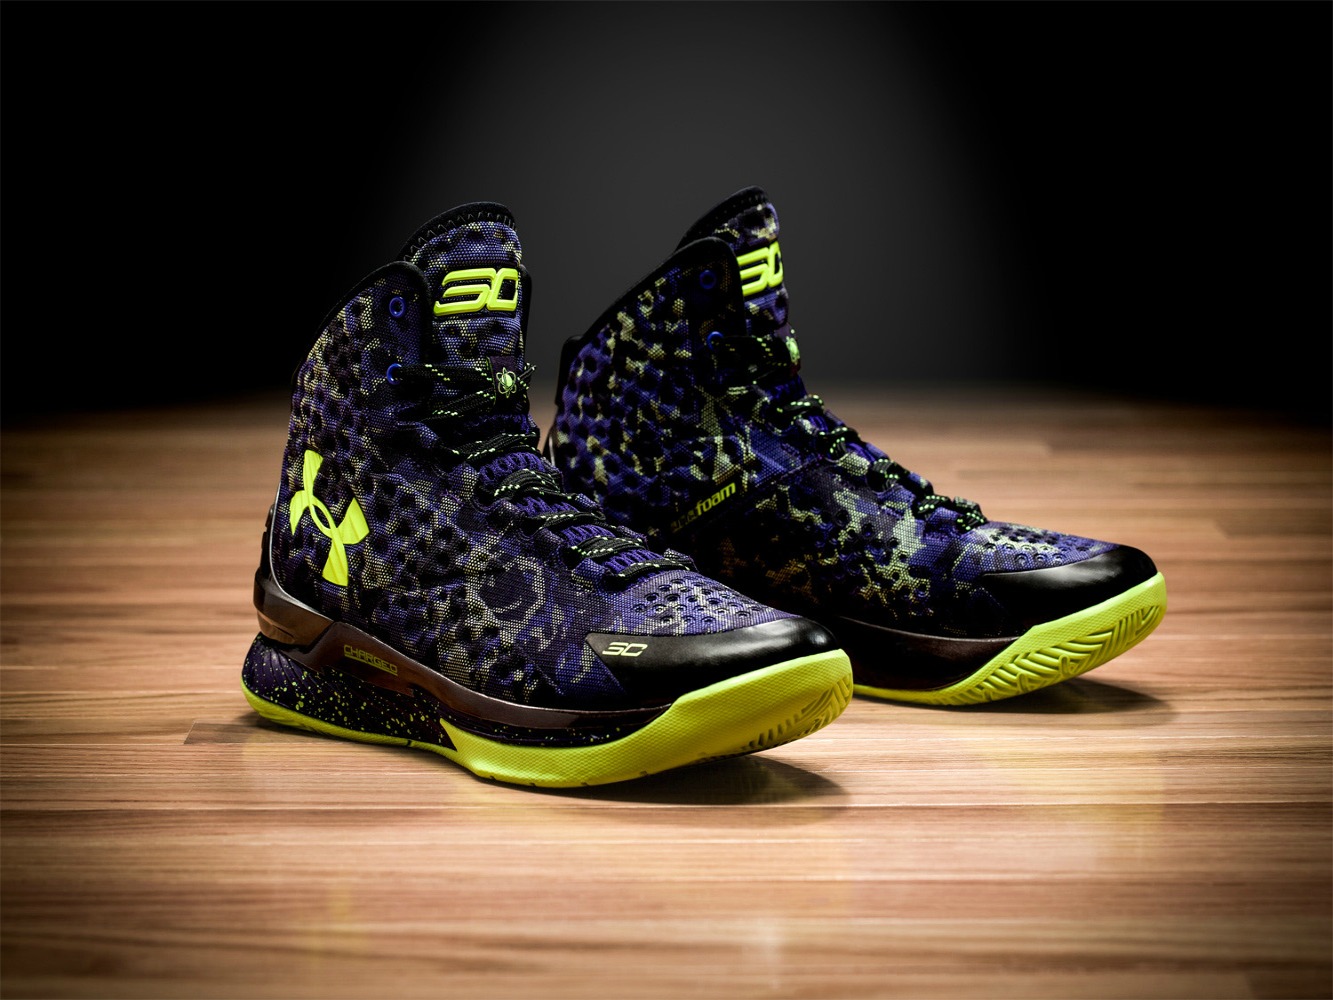 Stephen Curry Kicks  Stephen curry shoes, Curry shoes, Design nike shoes